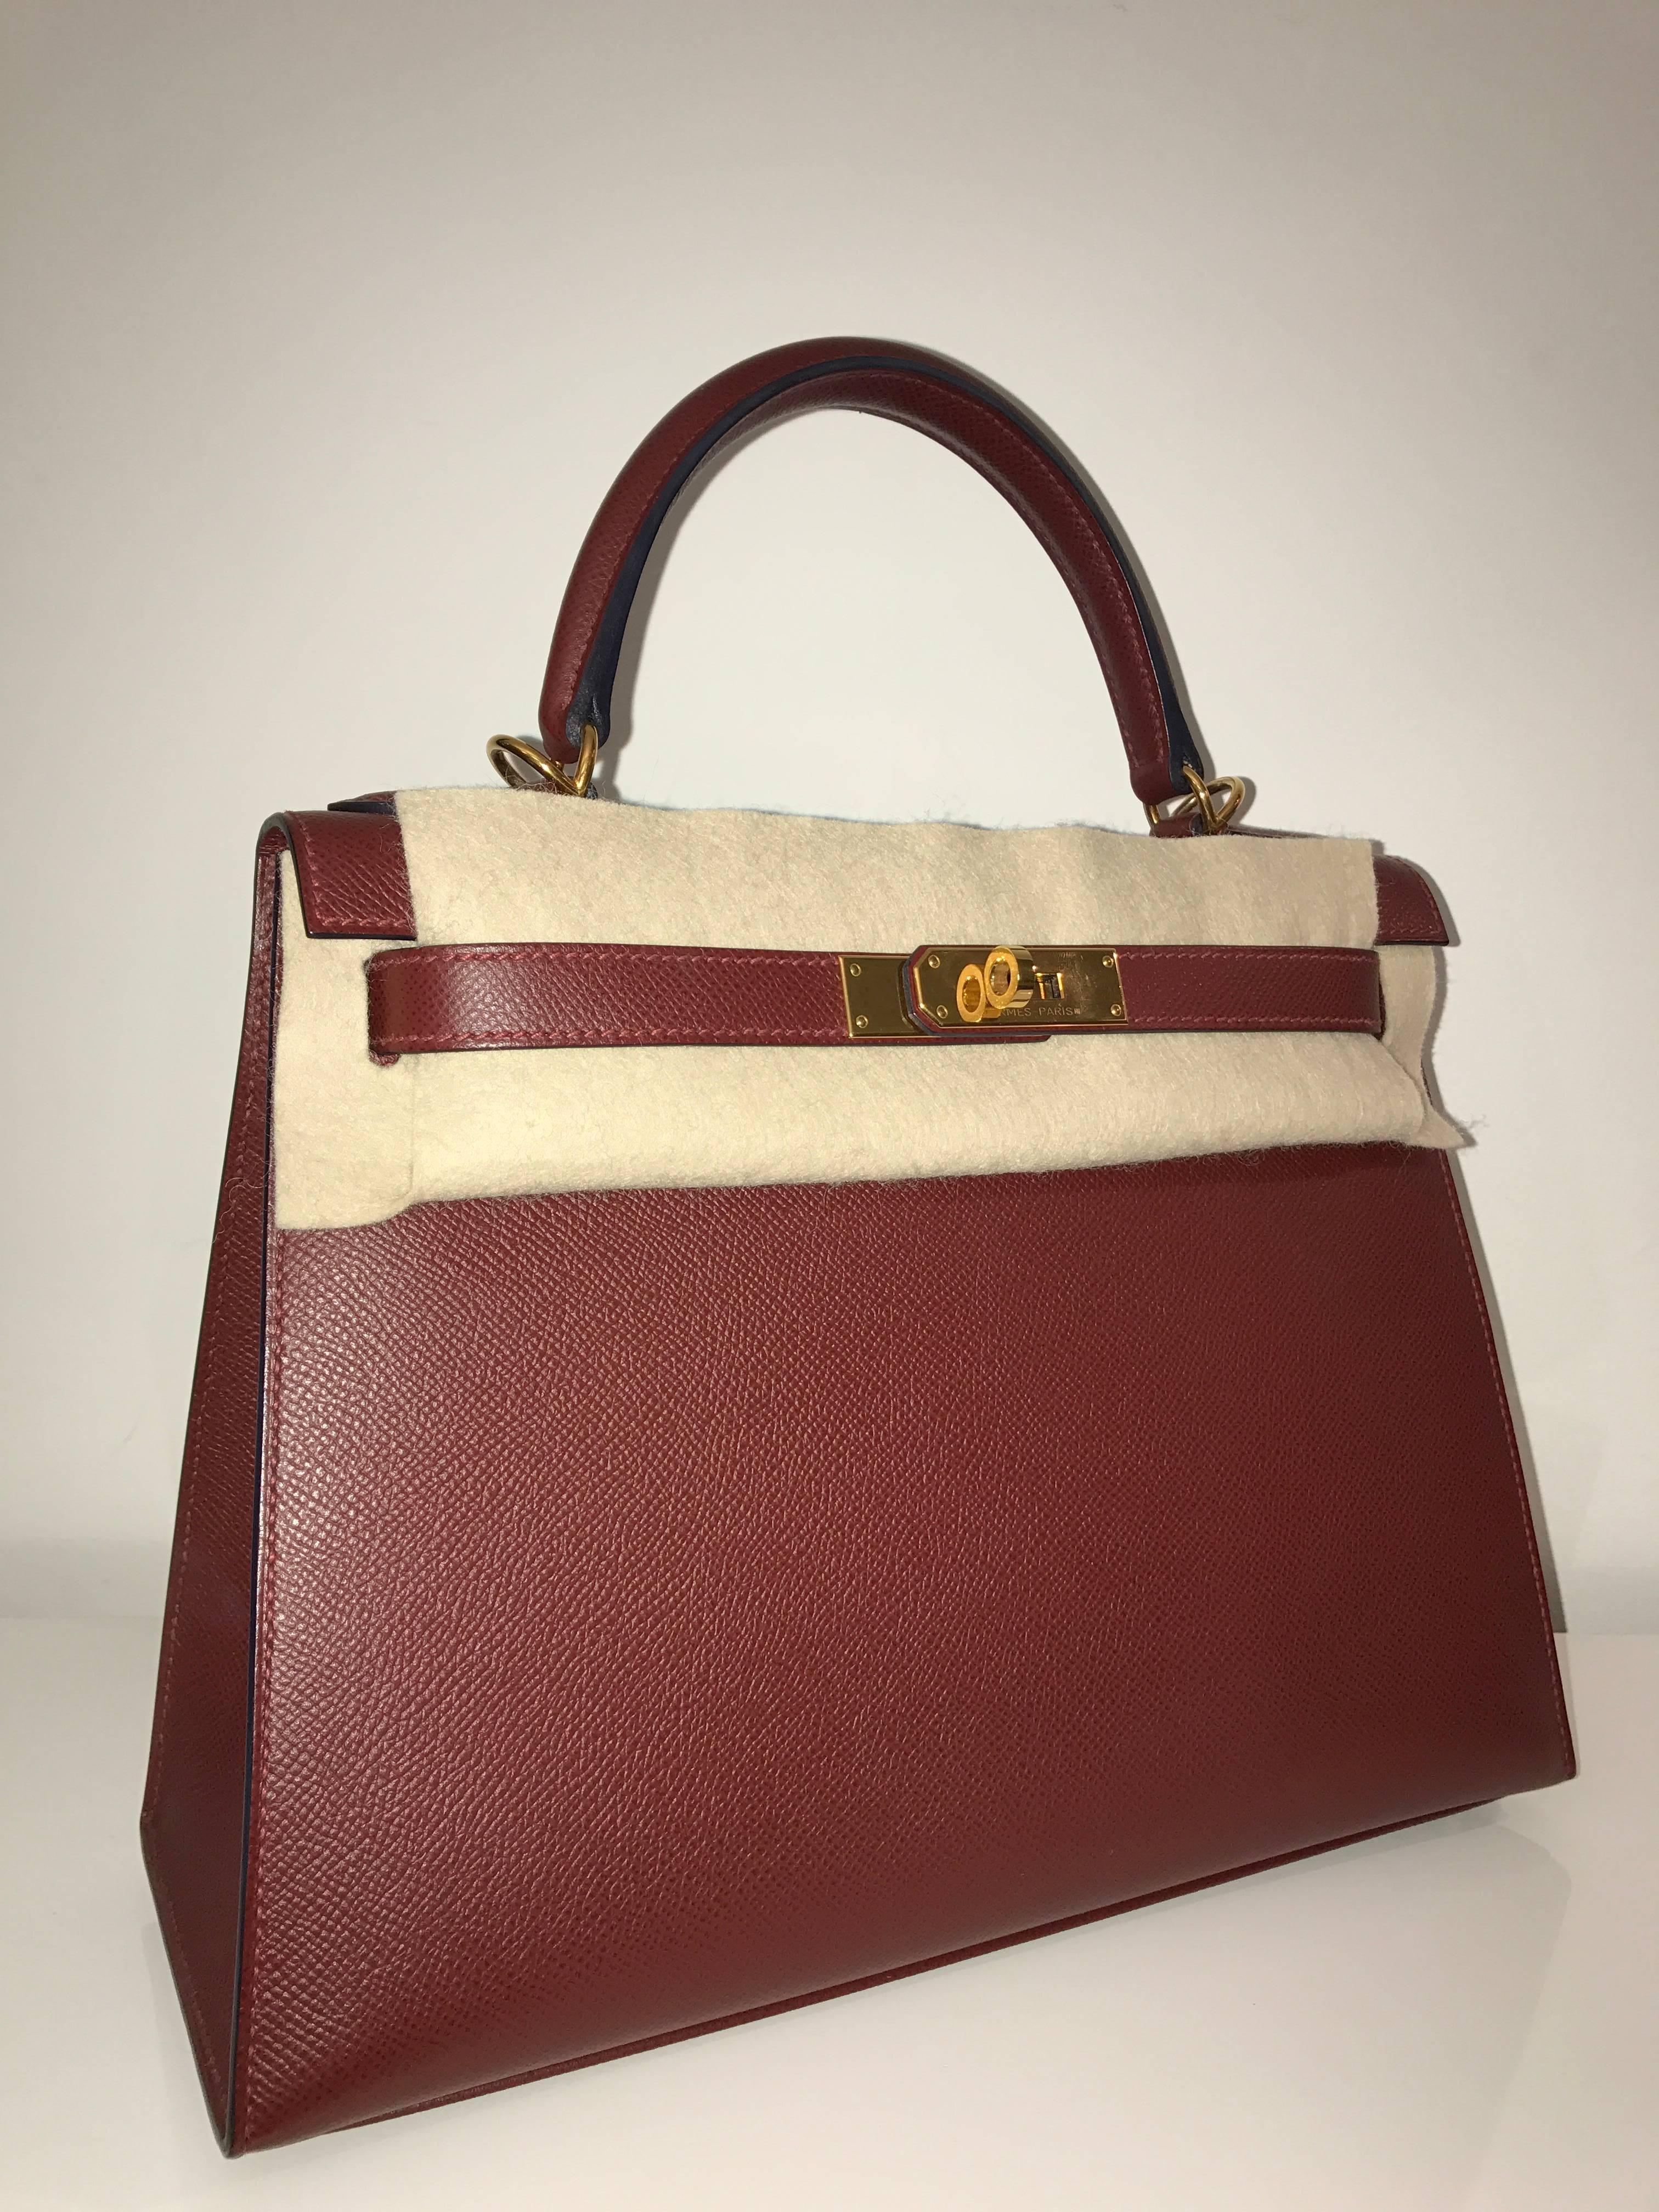 Hermes 
Kelly Size 28
Epsom Leather  
Colour Rouge H  
Gold Hardware
Store fresh, comes with receipt and full set (dust bag, box...) 
Hydeparkfashion specializes in sourcing and delivering authentic luxury handbags, mainly Hermes, to clients around